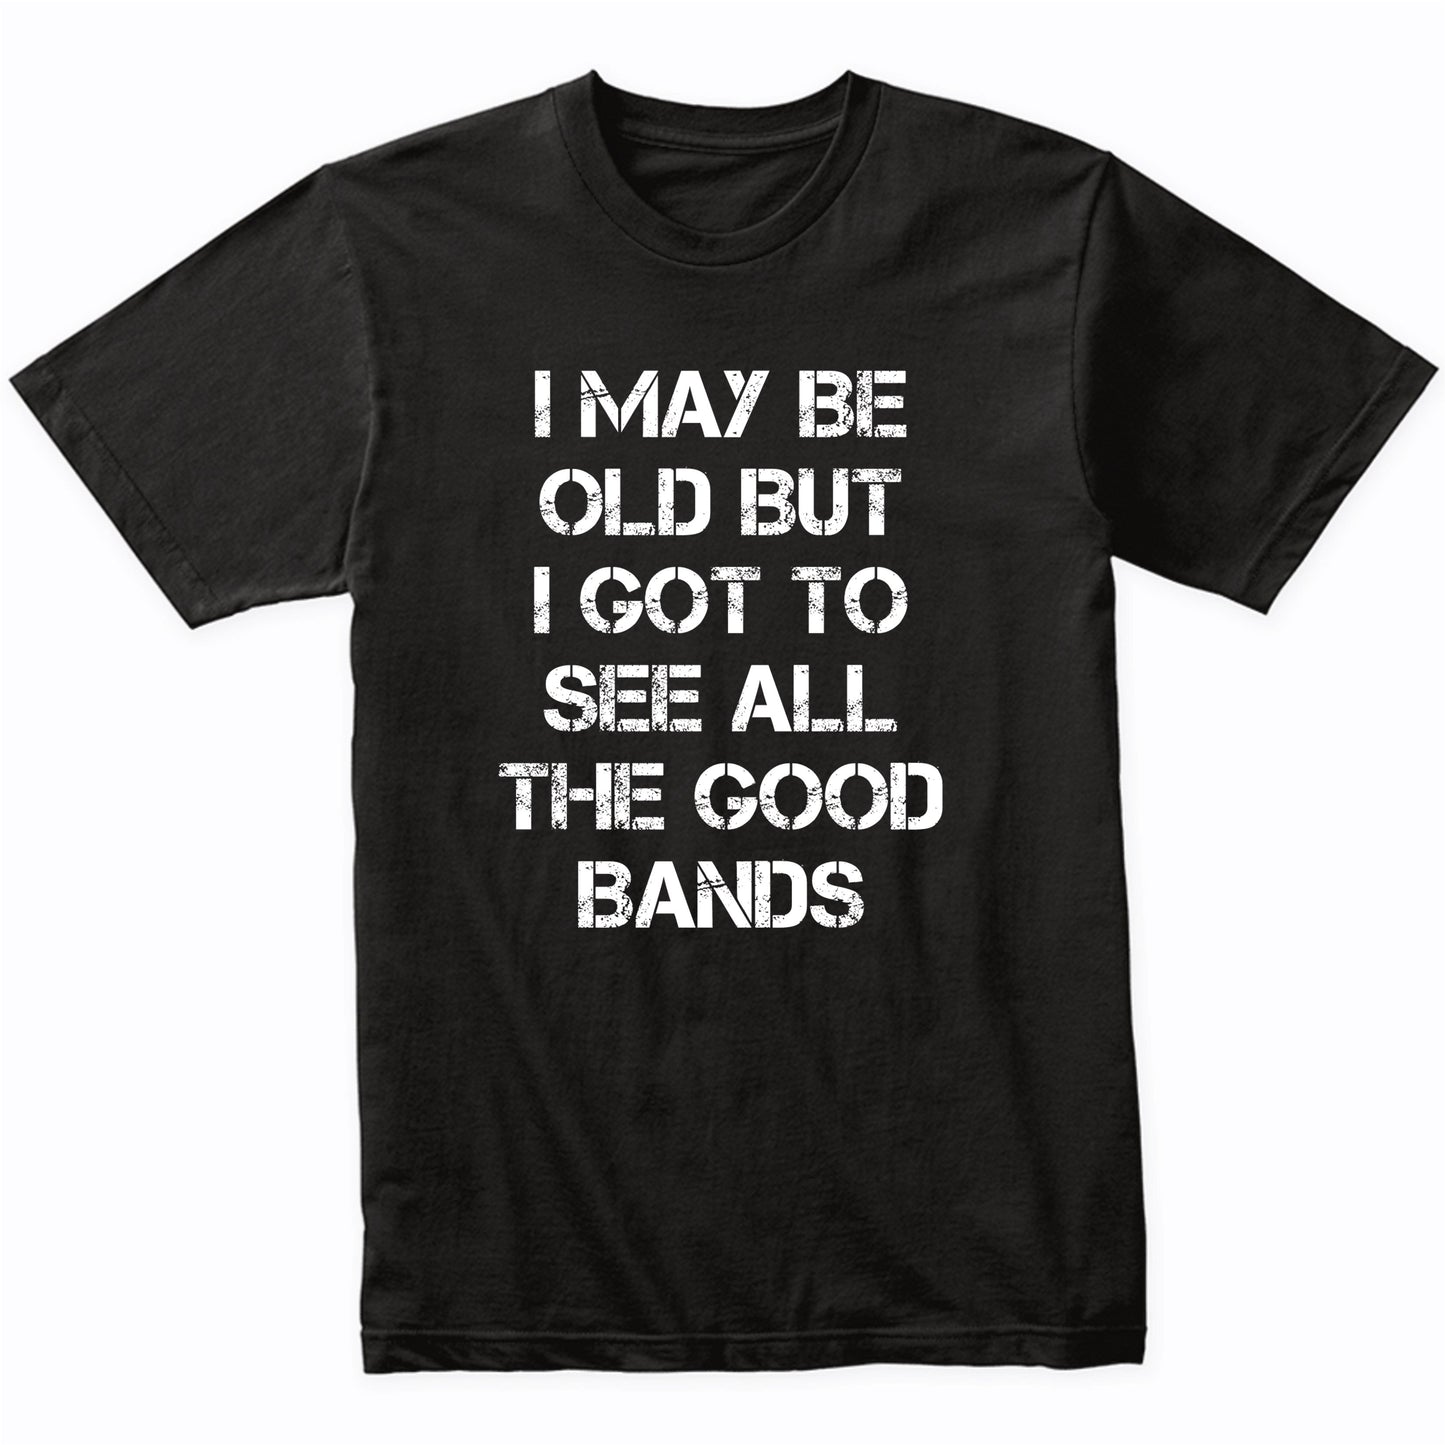 I May Be Old But I Got To See All The Good Bands Funny Shirt